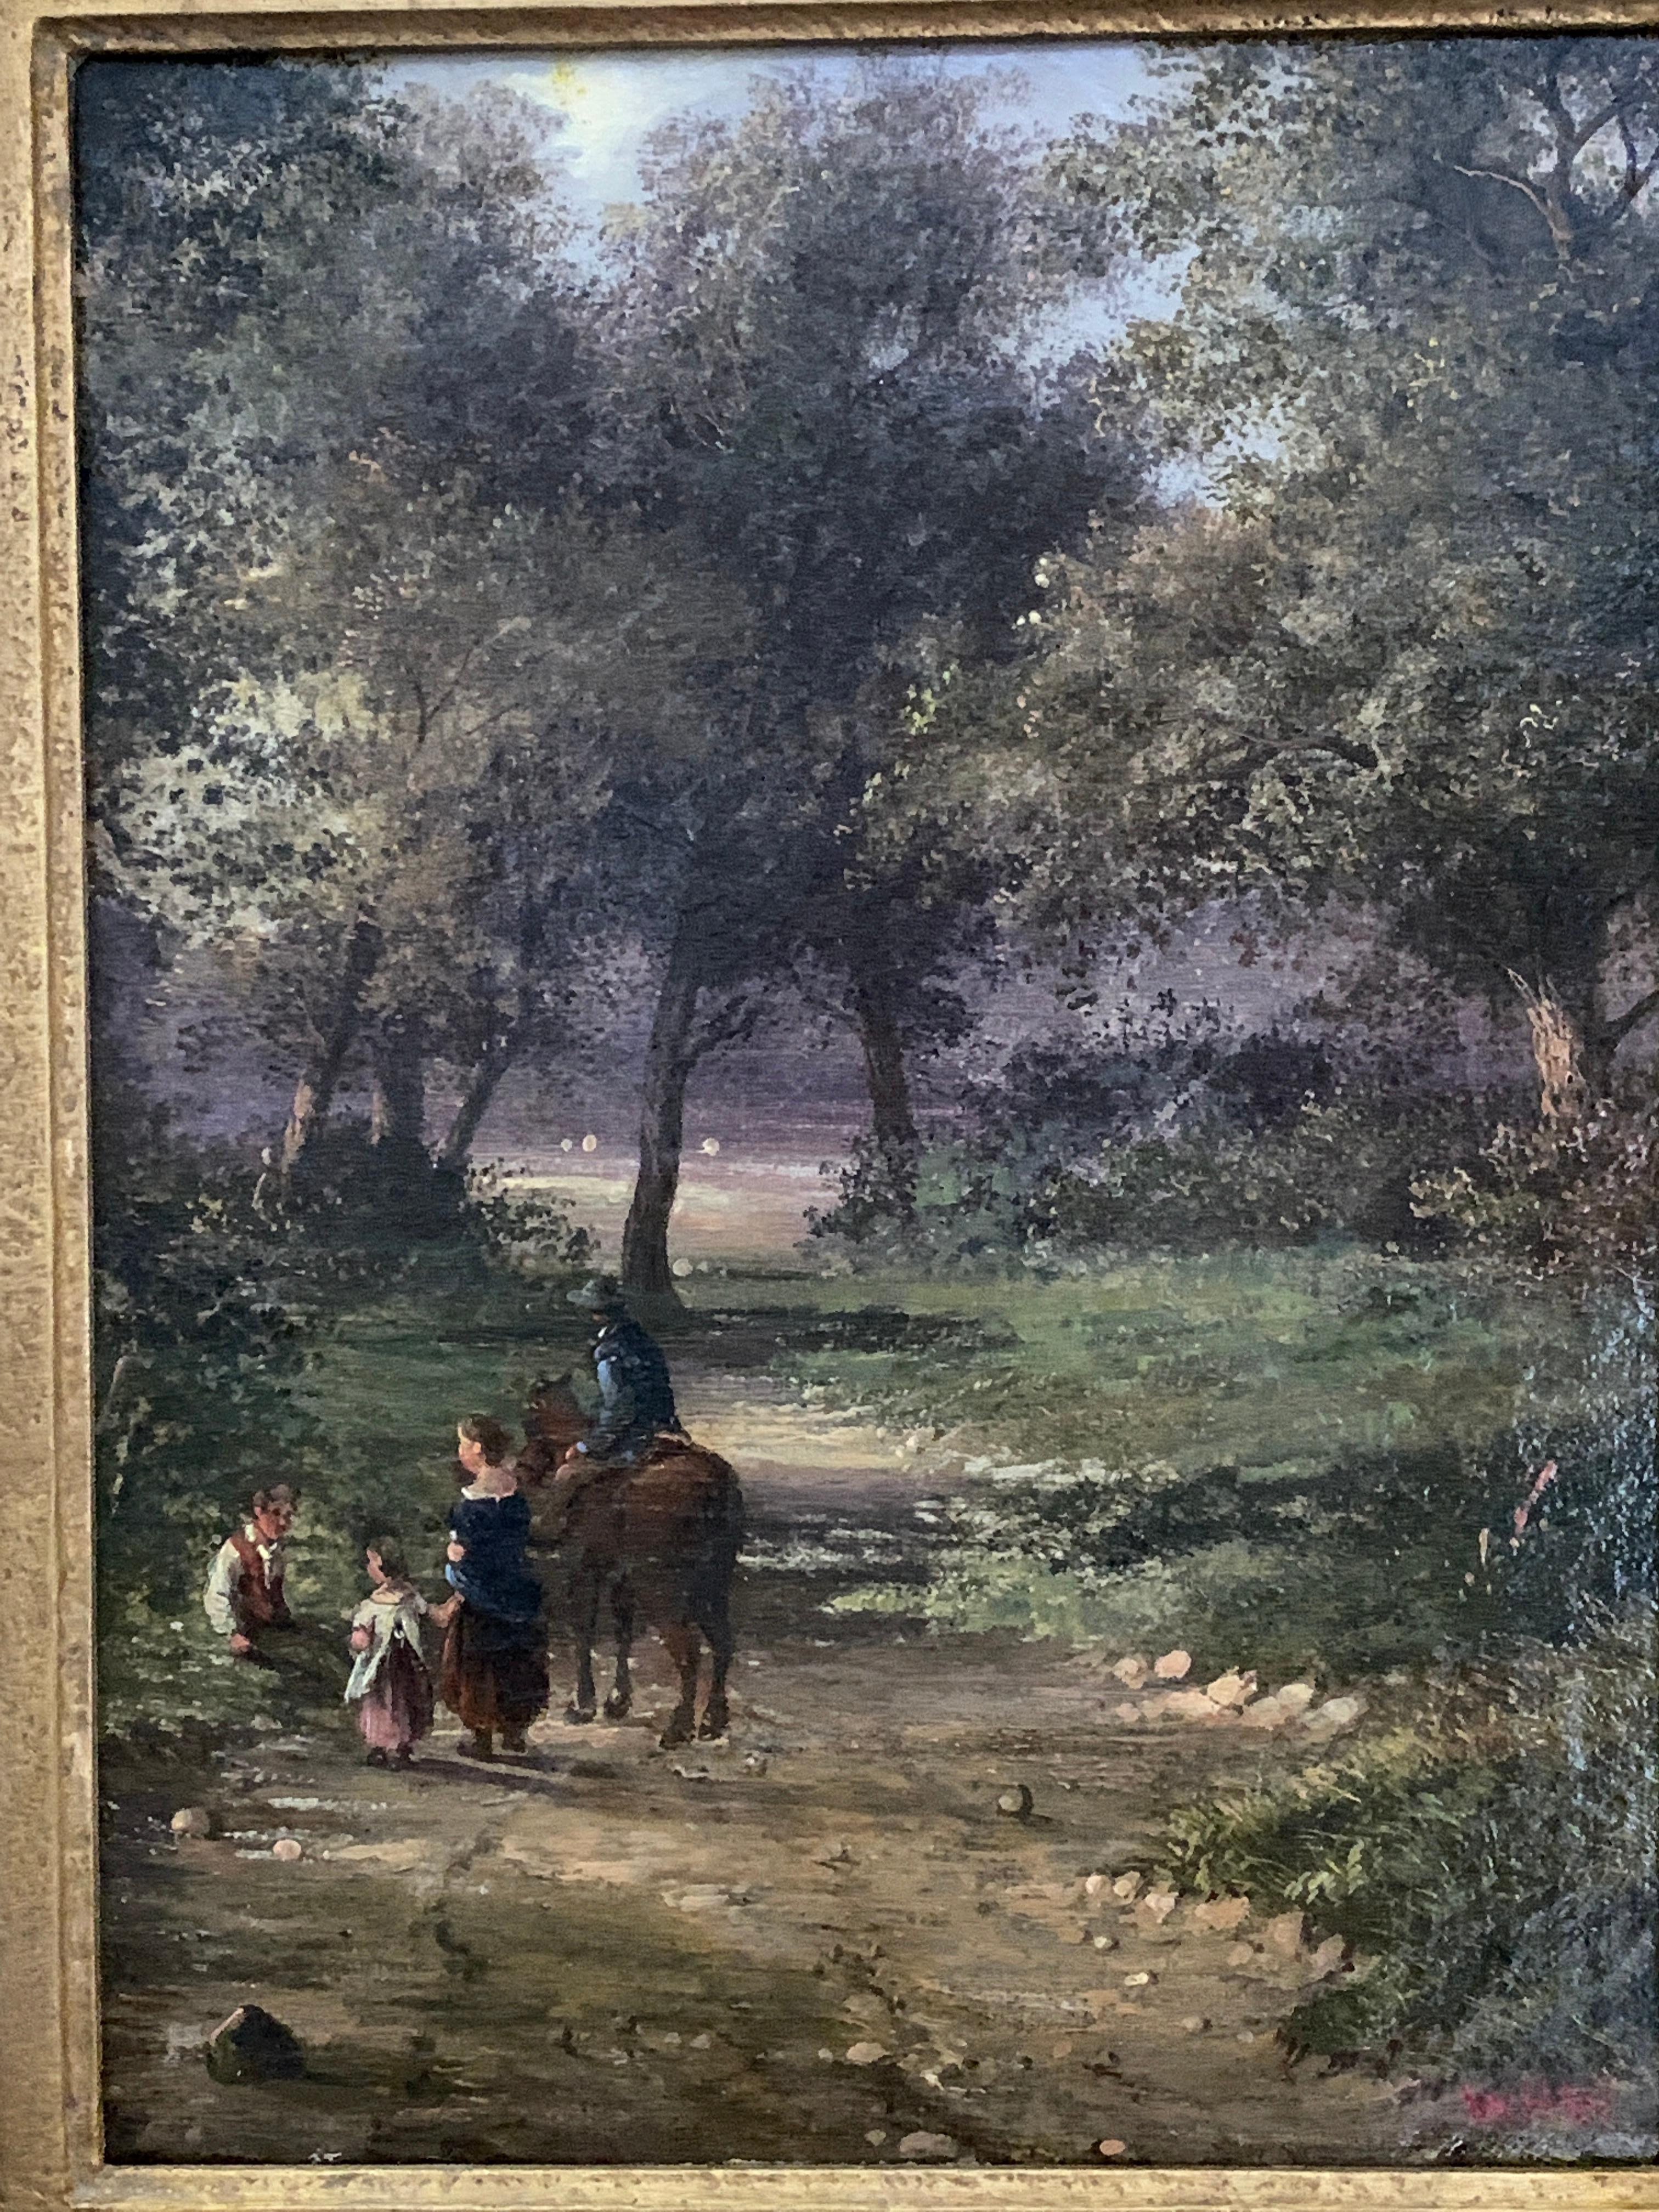 English 19th century landscape with figures and a man on a horse in a woodland - Painting by Walter Heath Williams